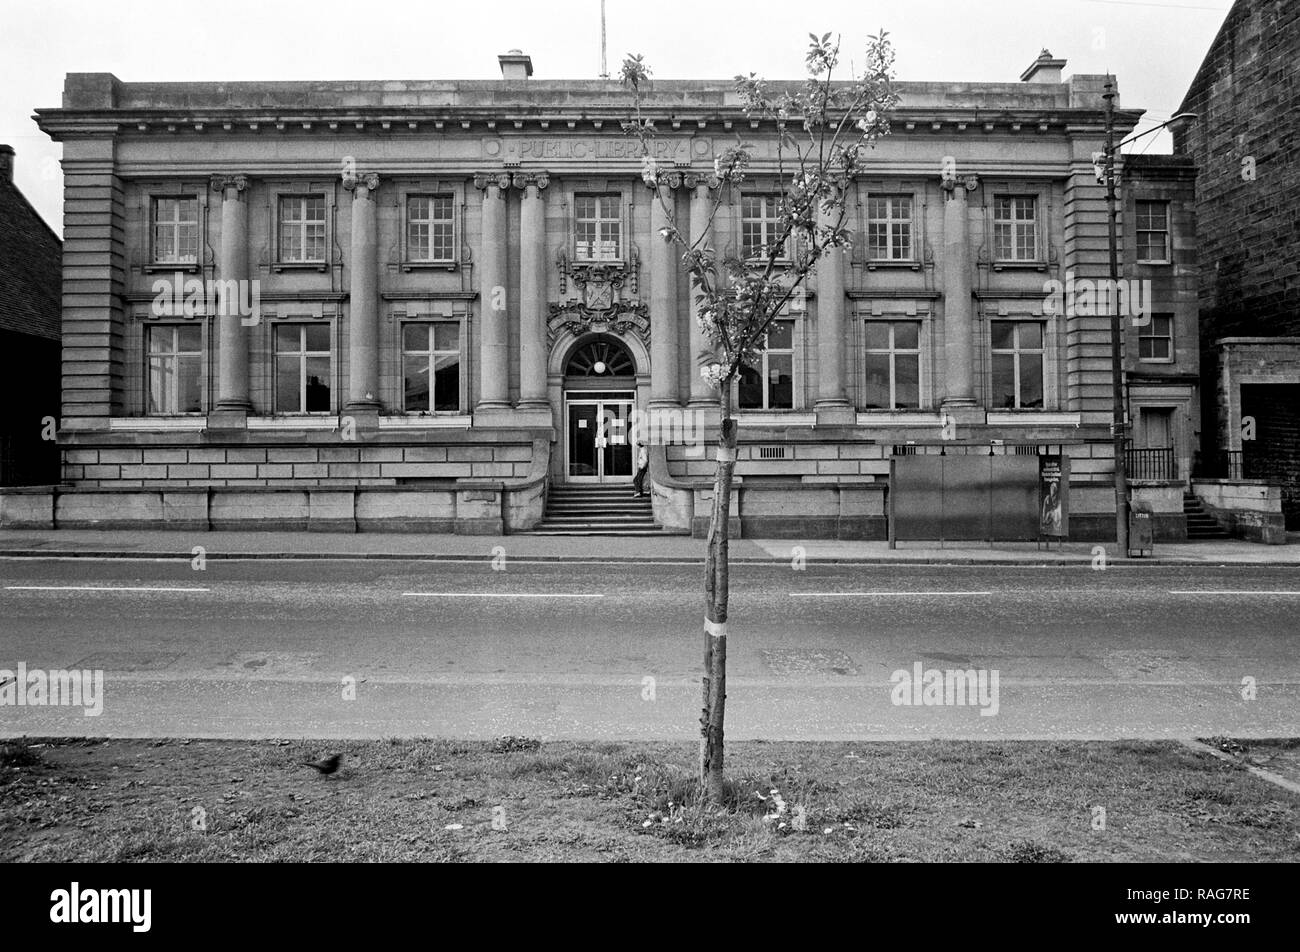 Clydebank Library. One of the few good looking buildings in Clydebank. It was badly damaged in the Clydebank Blitz, but was rebuilt. Dumbarton Road 1979 Stock Photo